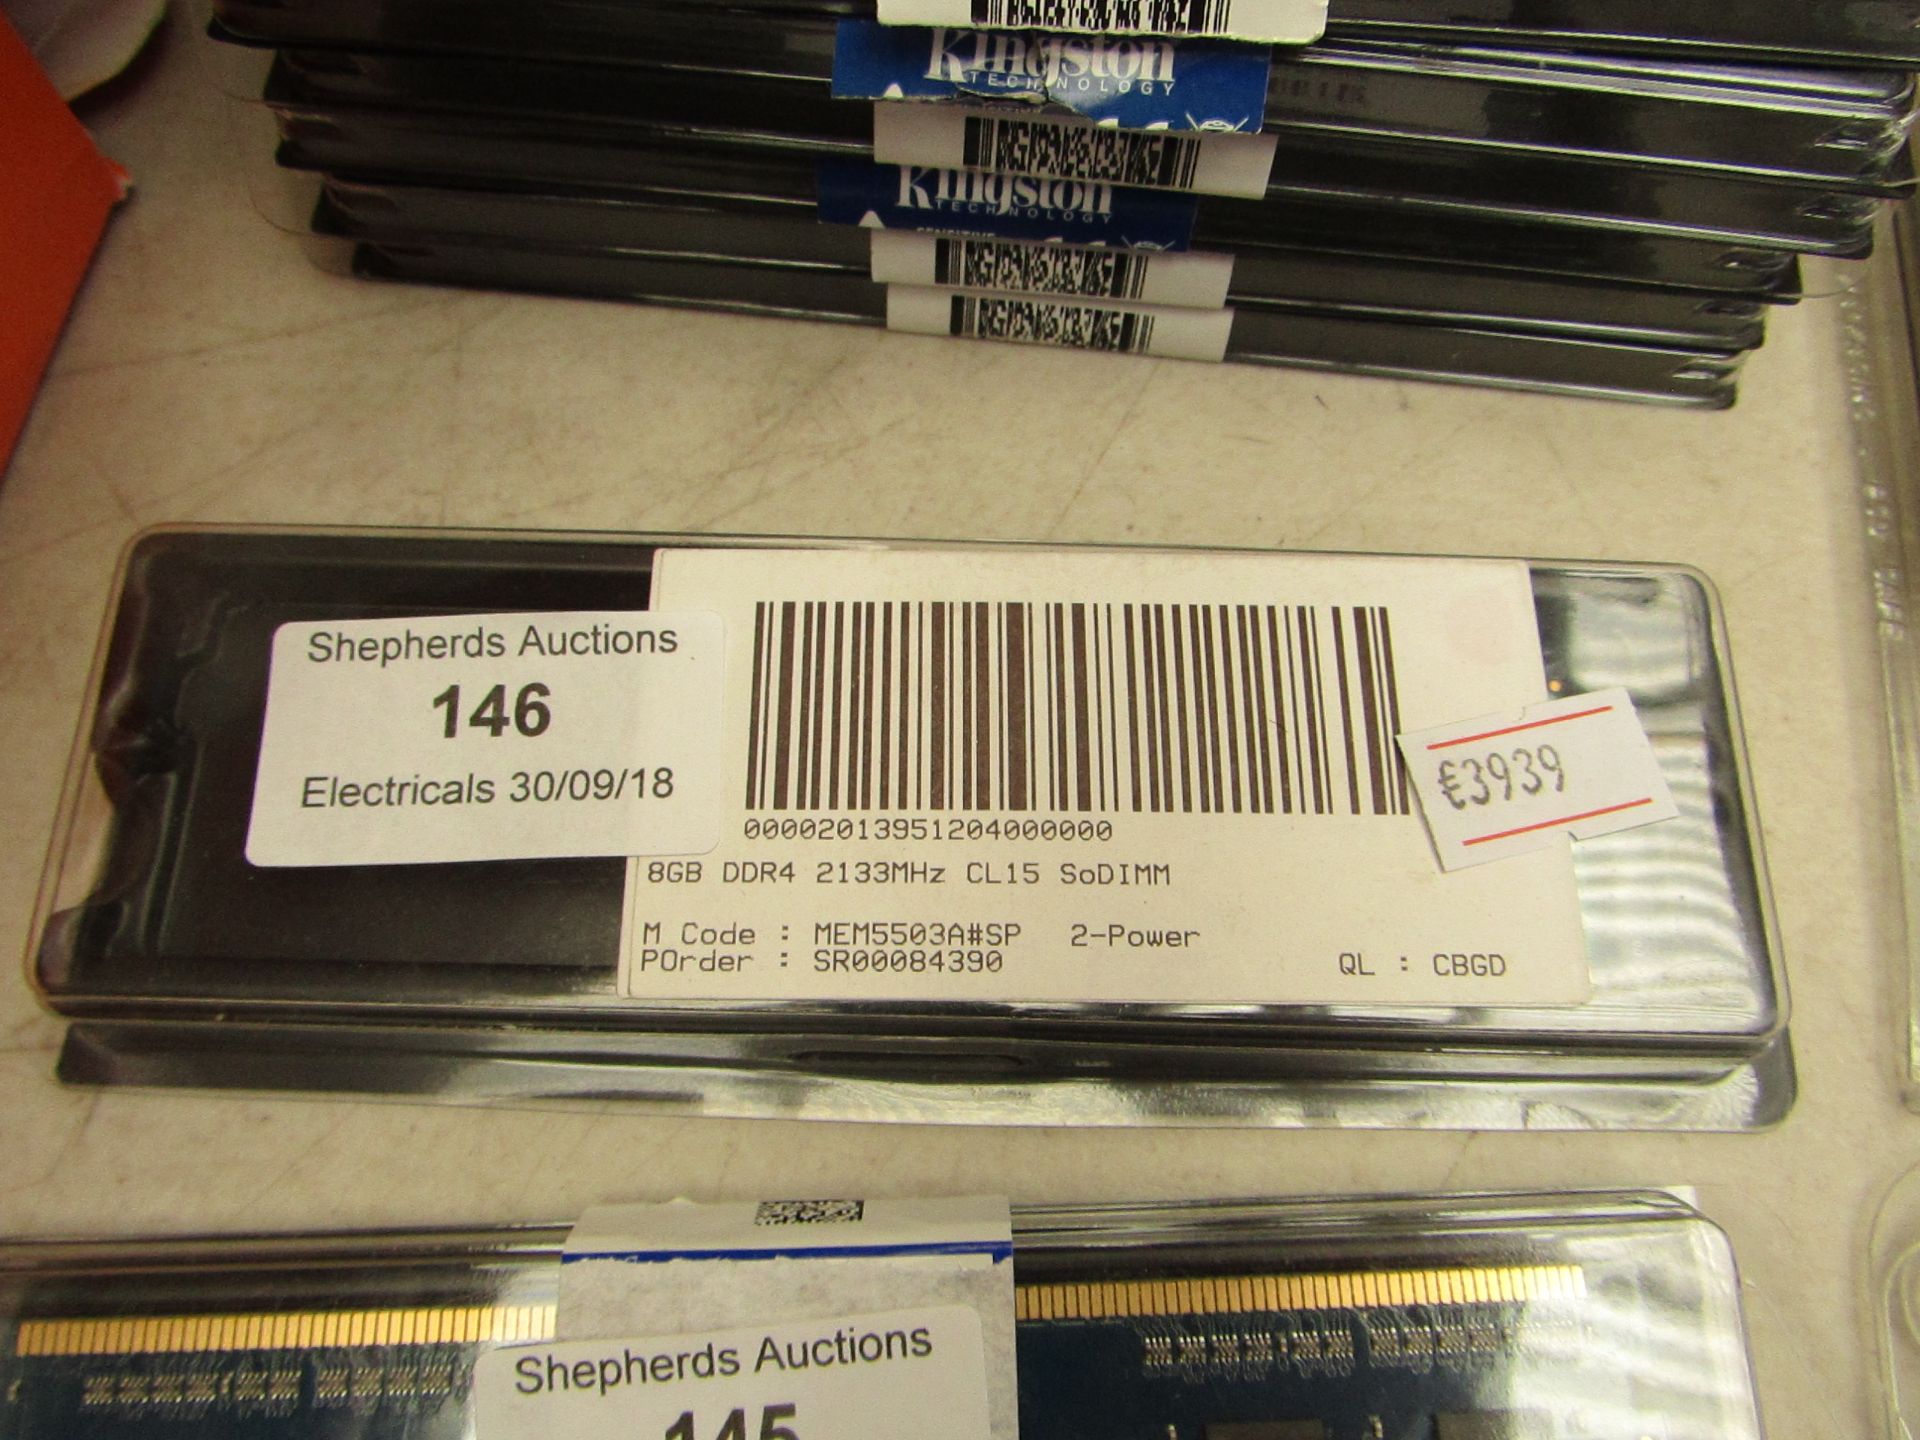 8GB memory kit DDR4 2133MHz, CL15 sodimm, untested but looks unused